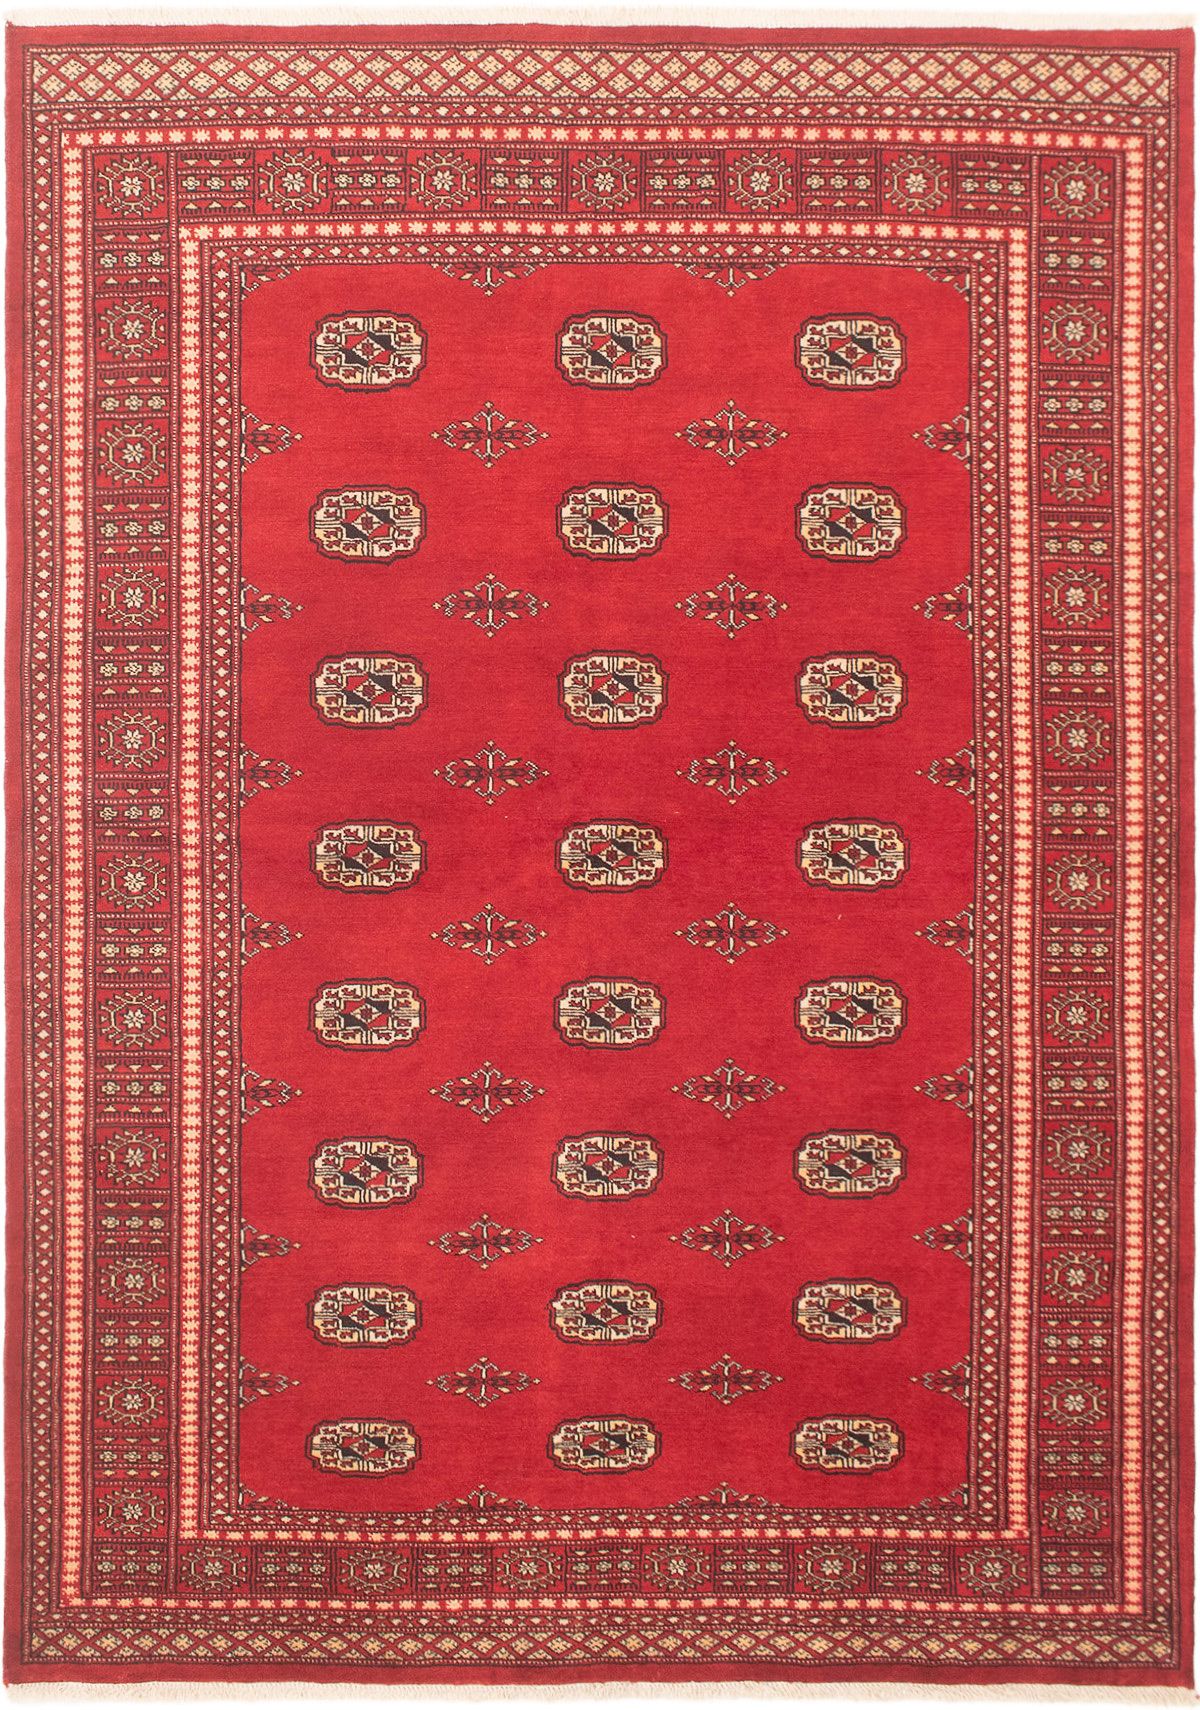 Hand-knotted Finest Peshawar Bokhara Red Wool Rug 5'7" x 7'9"  Size: 5'7" x 7'9"  